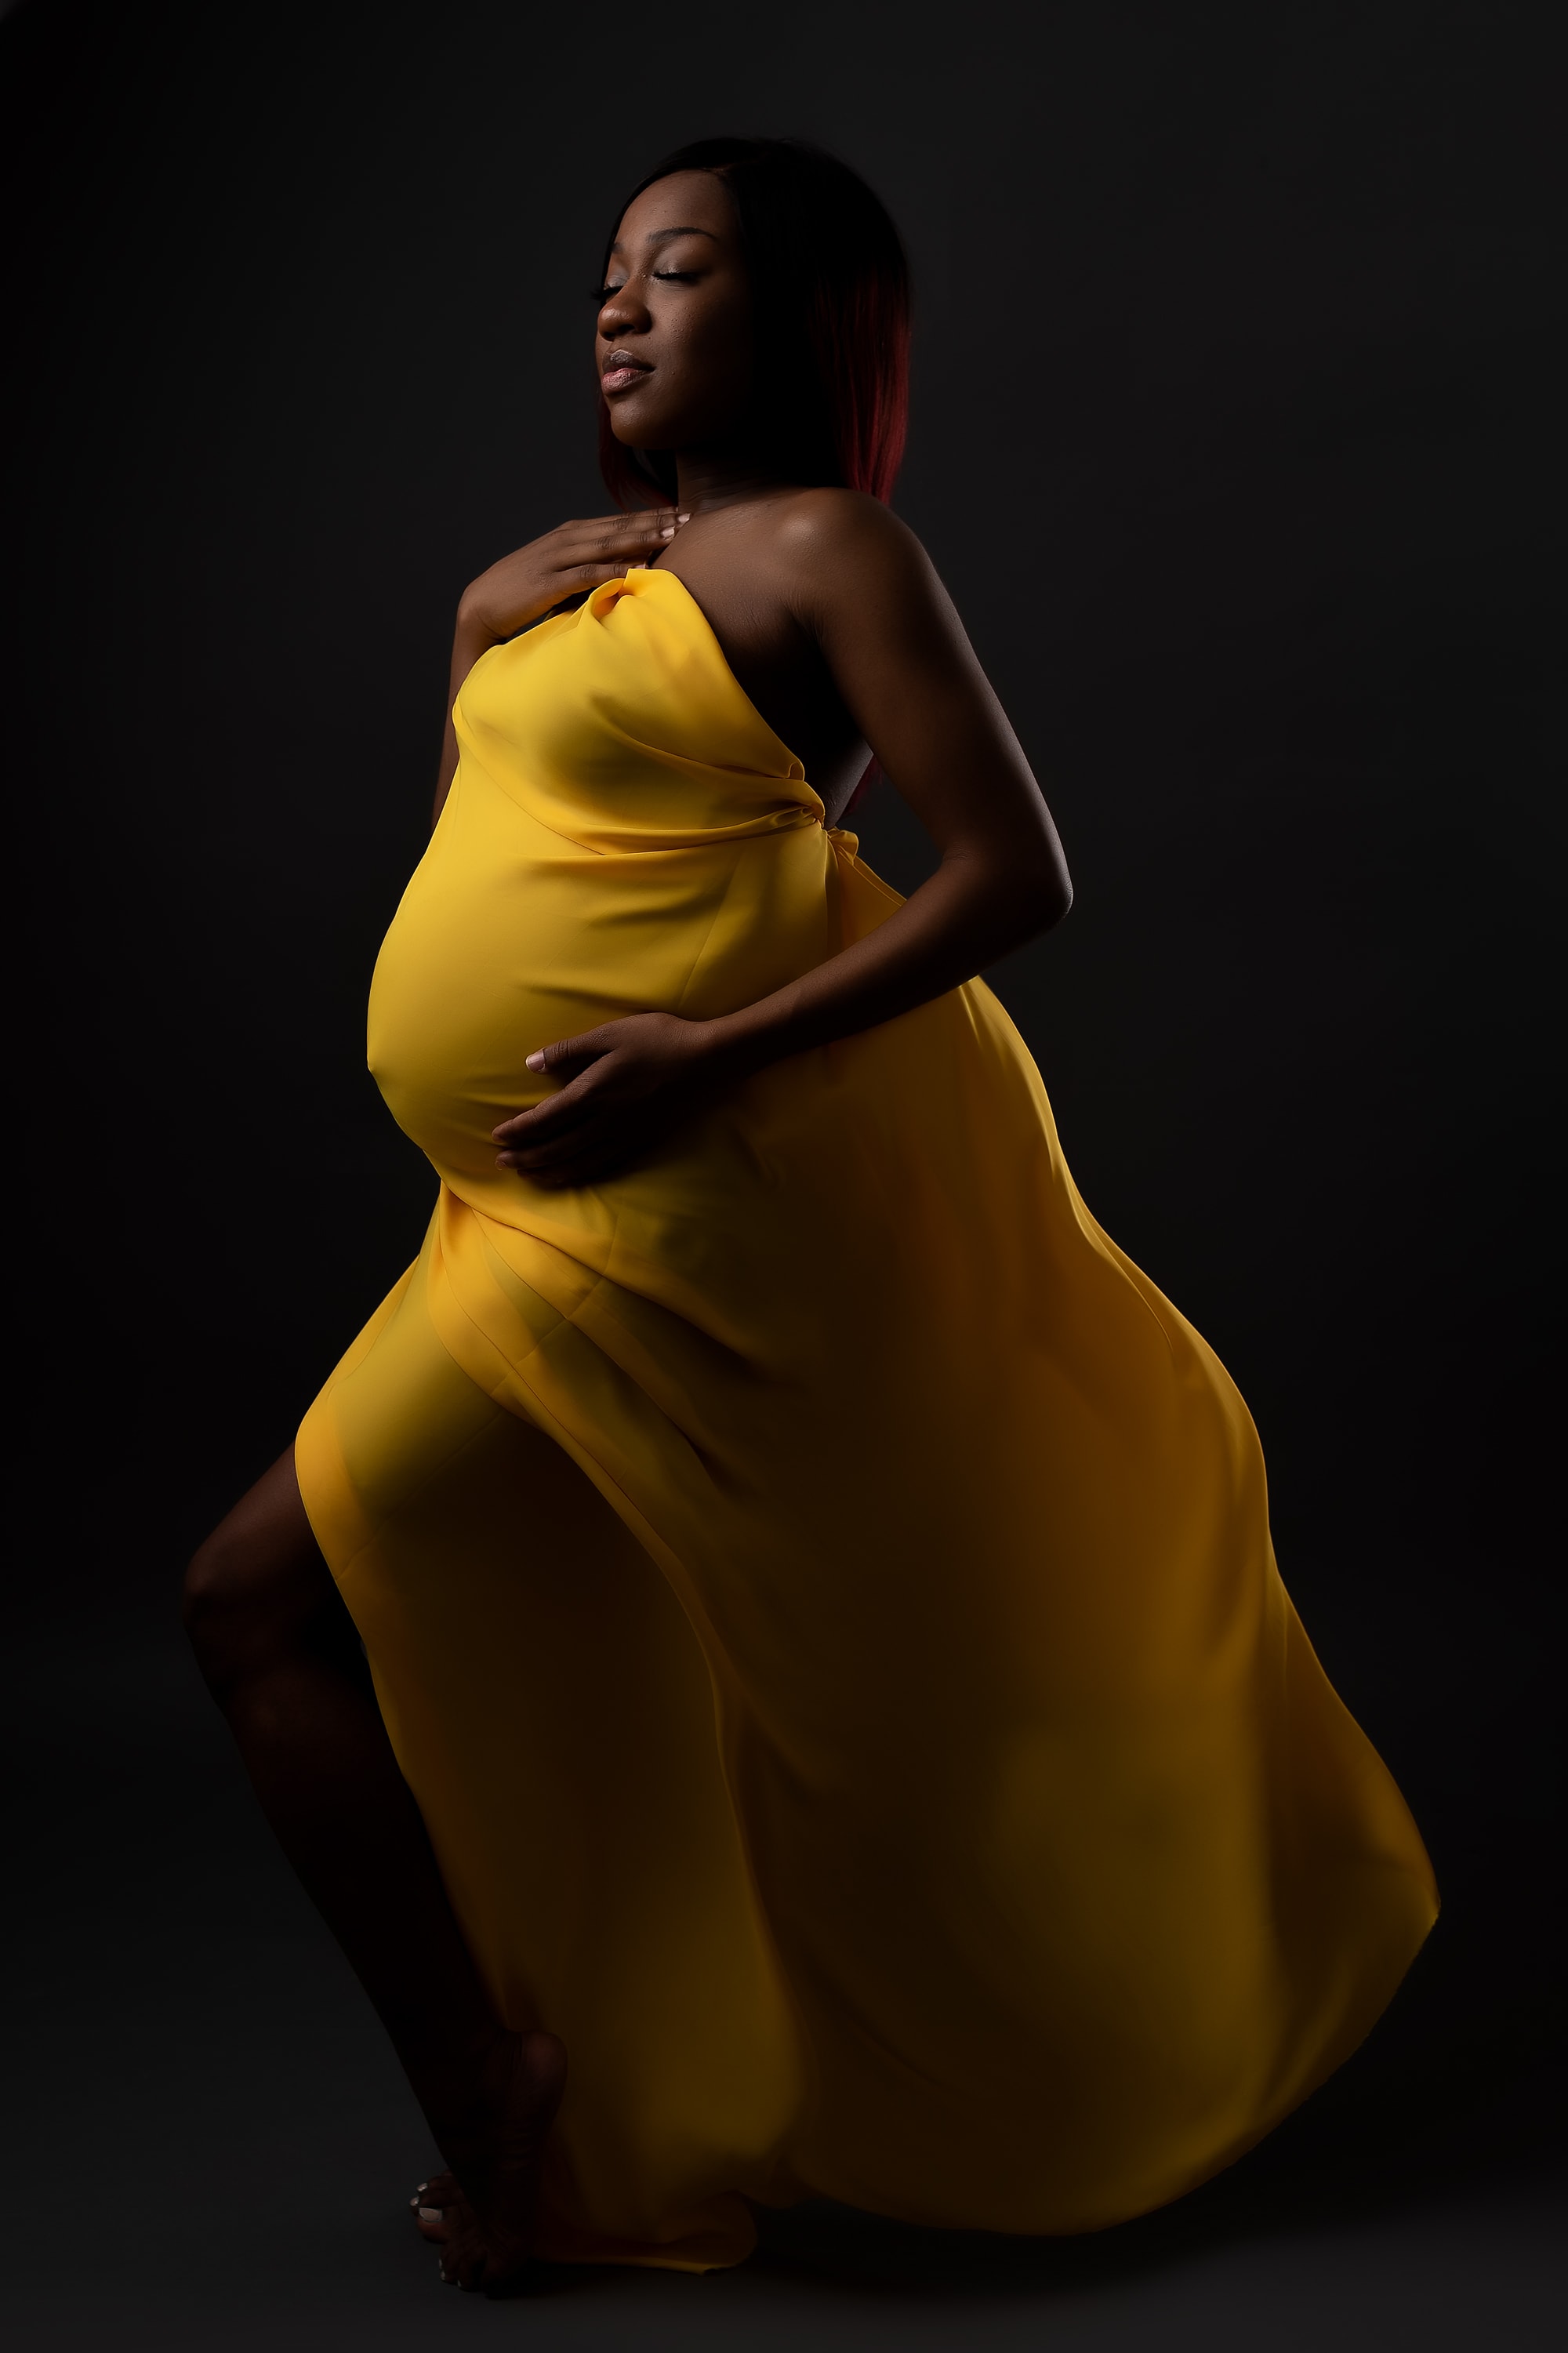 Maternity Photoshoot and Pregnancy Photography - Tianna J-Williams Photography